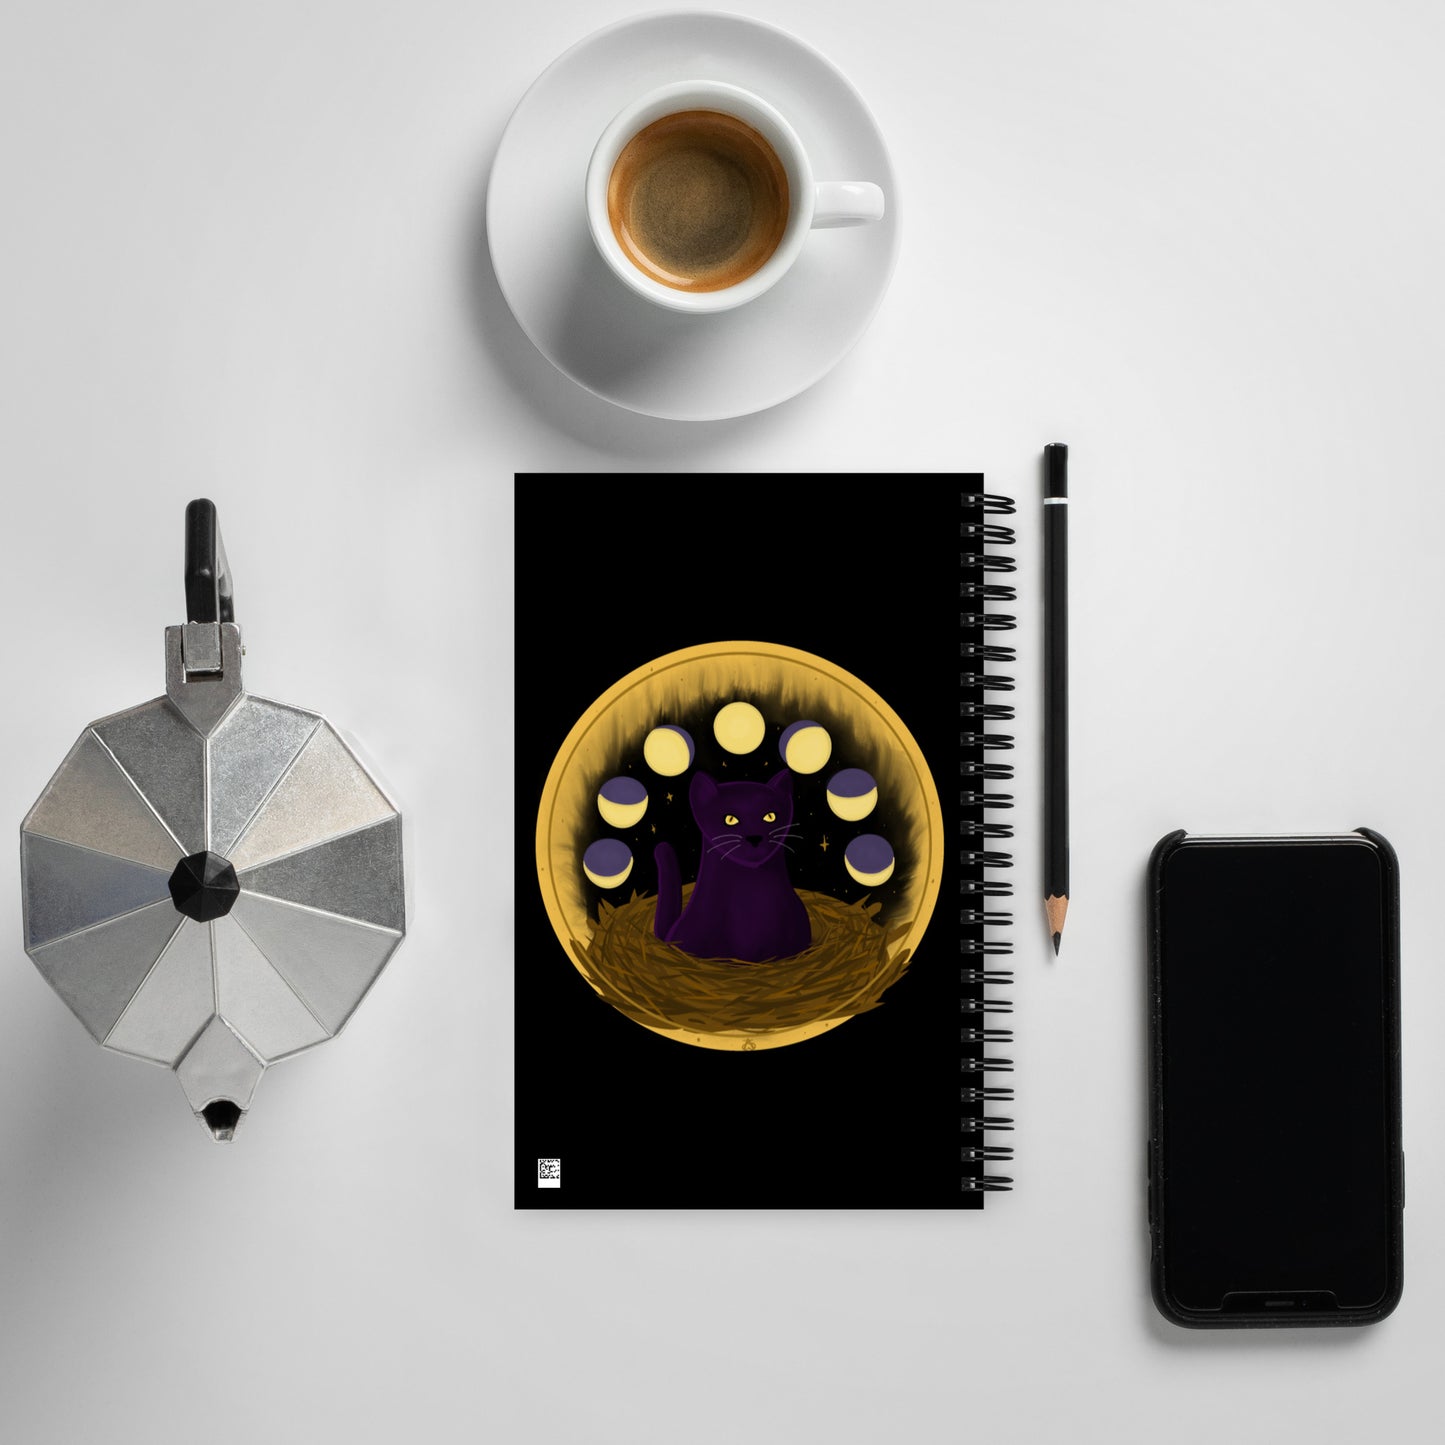 Back view: A black notebook with a painting of a dark purple cat with golden eyes sitting in a nest, ringed by the phases of the moon and golden stars behind it.